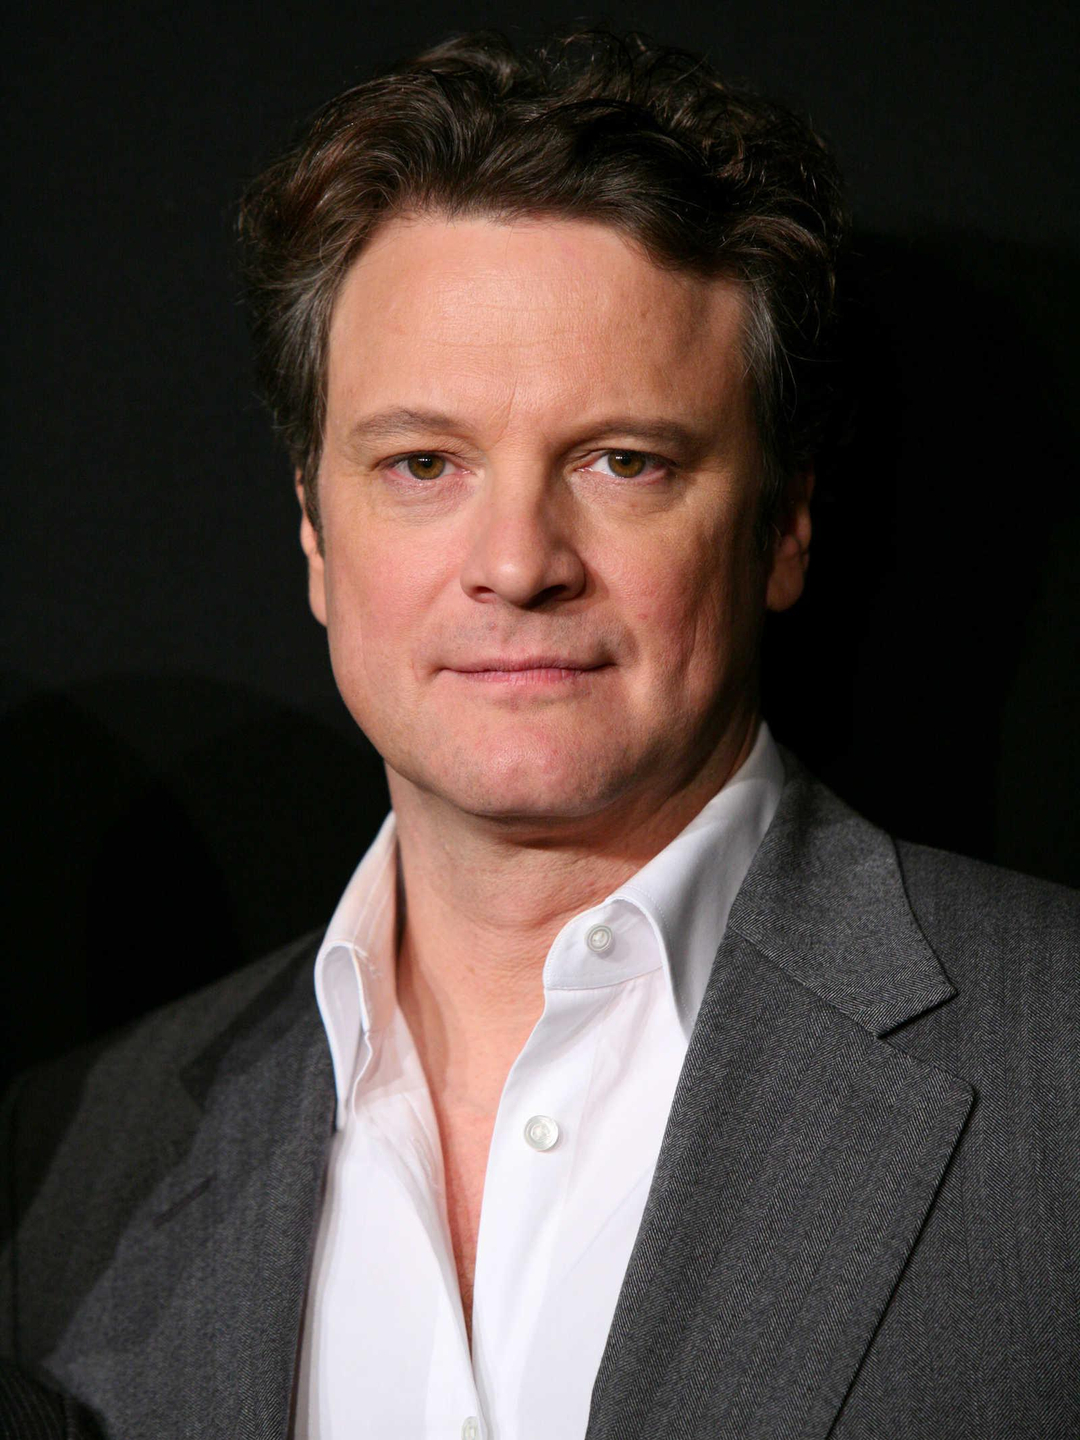 Colin Firth in real life